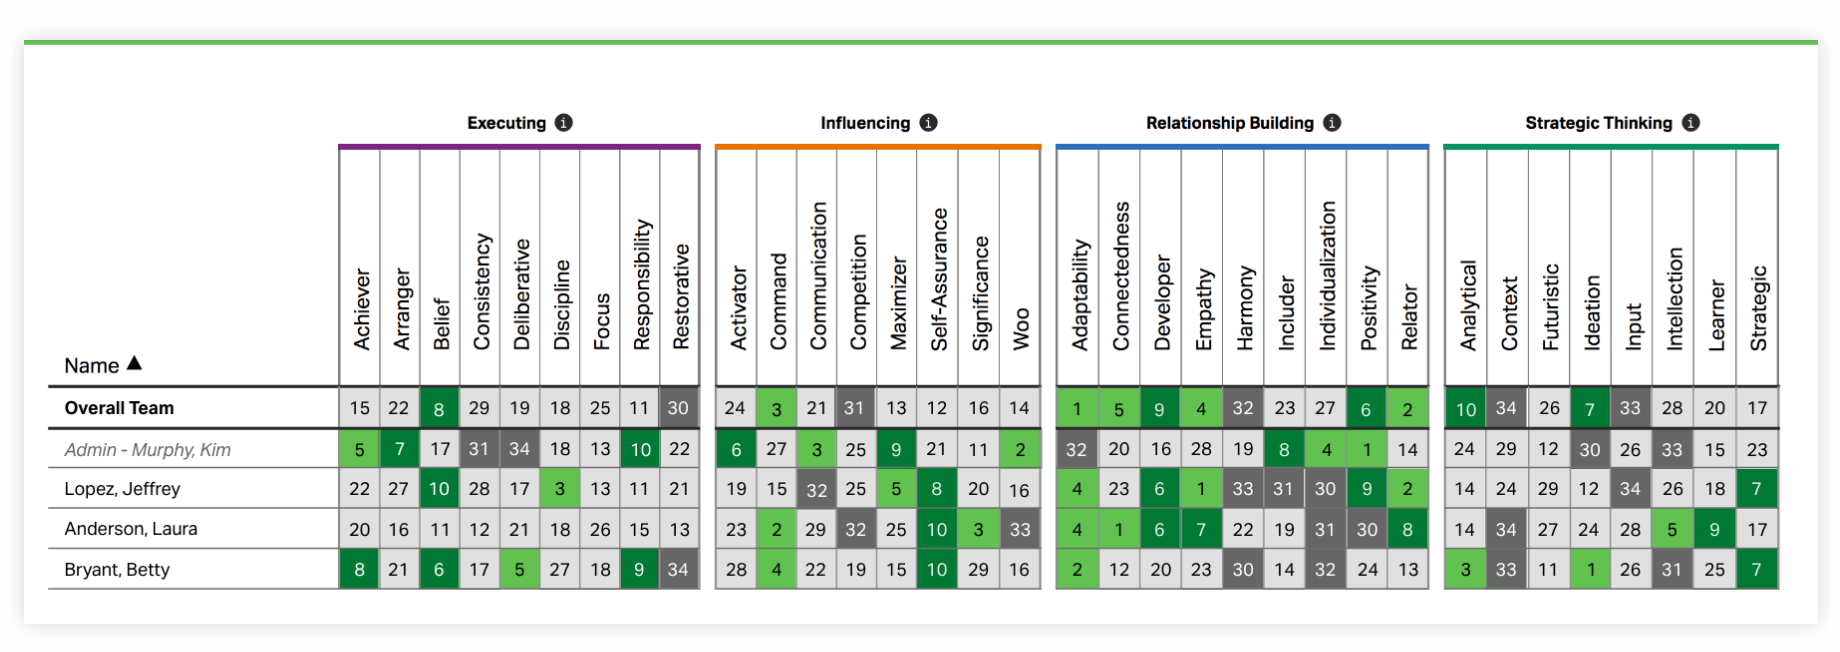 Grid organized by CliftonStrengths domains on top and names on the left to show each team members strengths rankings